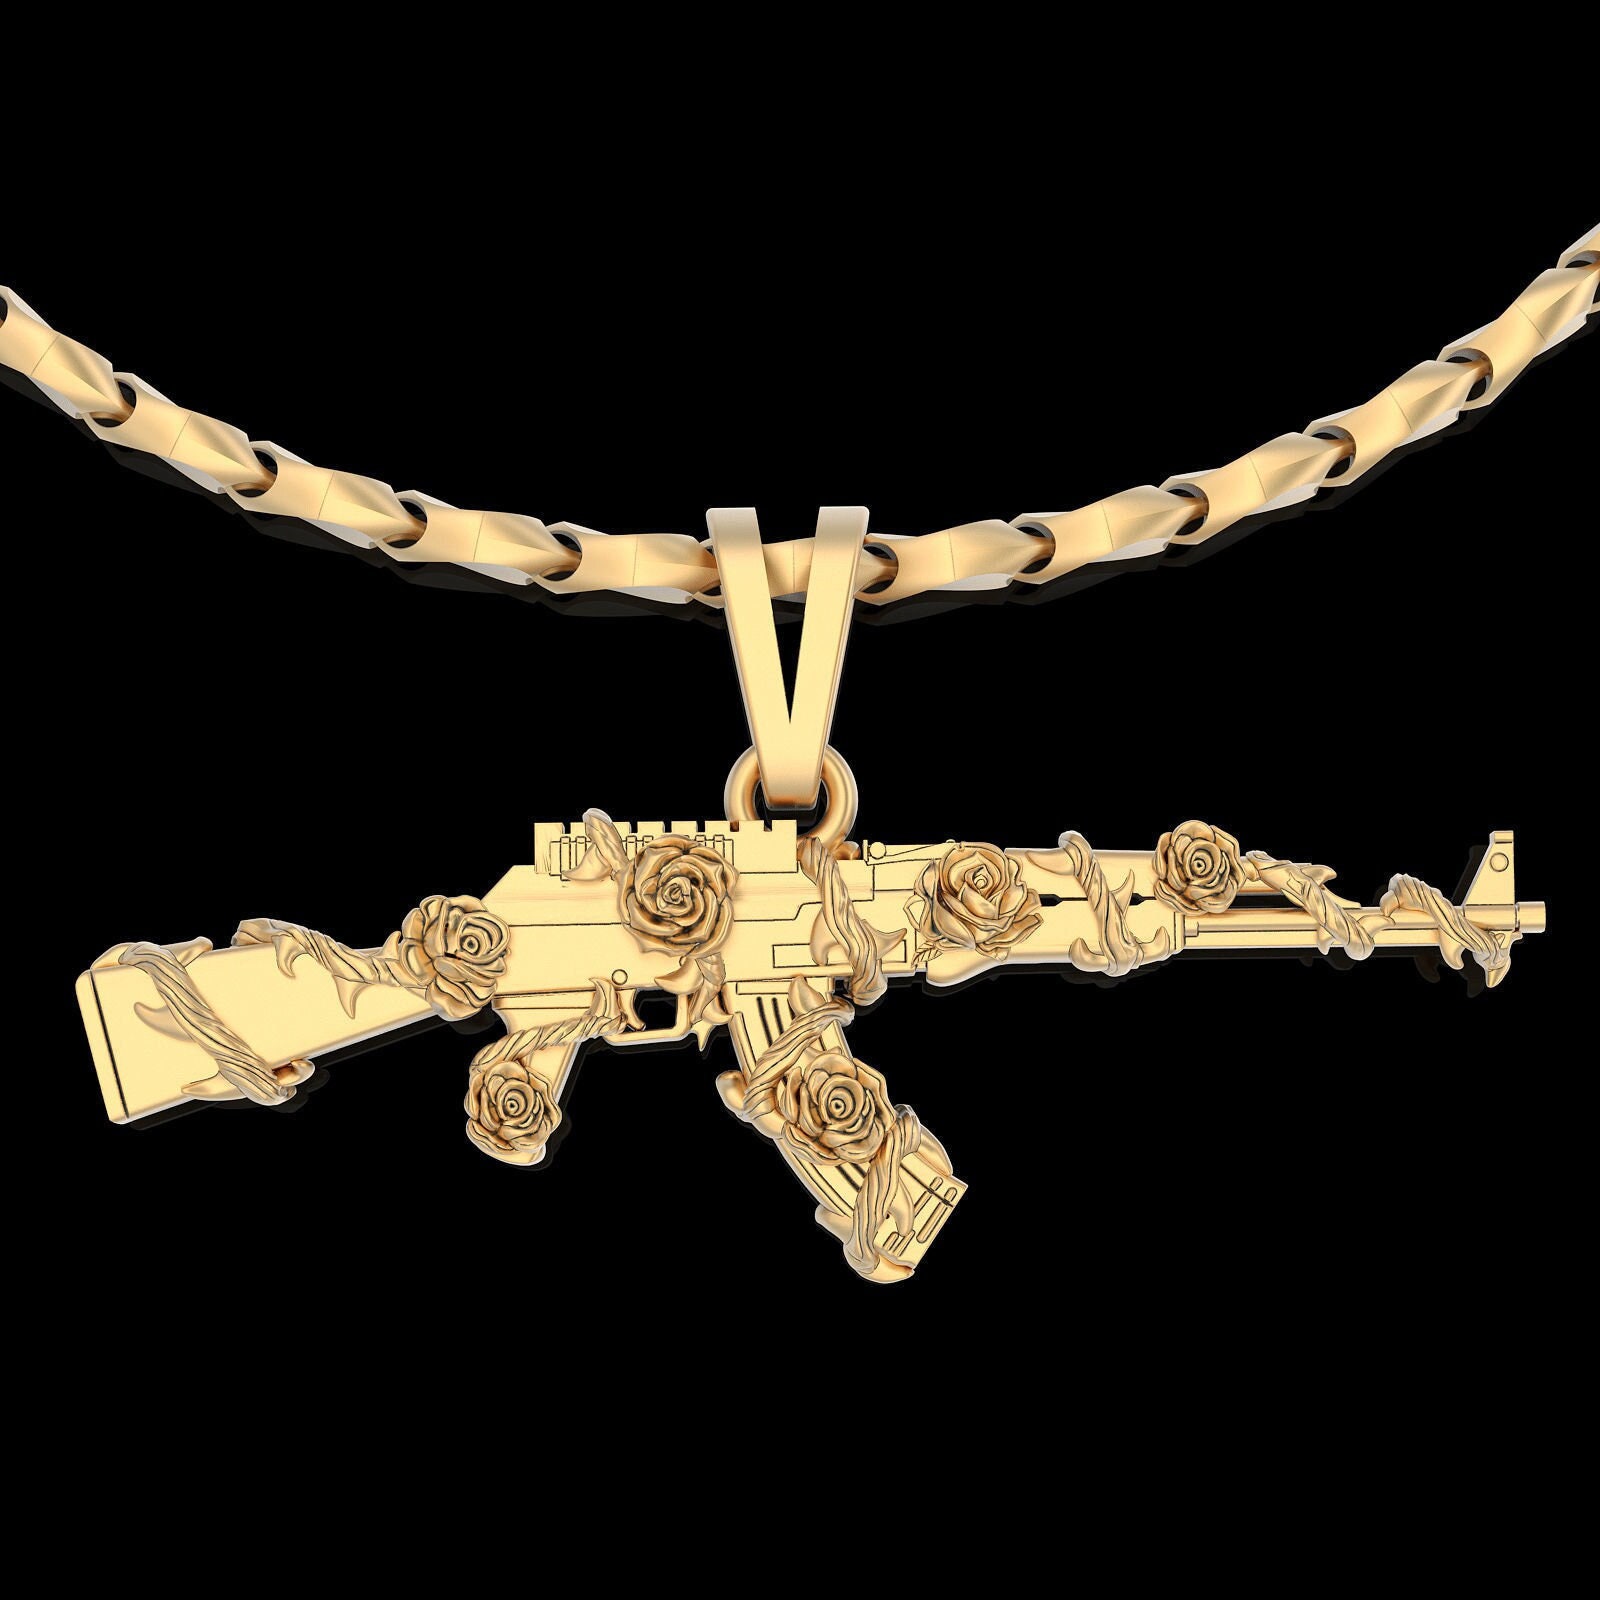 morir Stainless Steel AK-47 Rifle Gun Pendant Necklace with Chain 24Inch  Silver Stainless Steel Pendant Price in India - Buy morir Stainless Steel AK -47 Rifle Gun Pendant Necklace with Chain 24Inch Silver